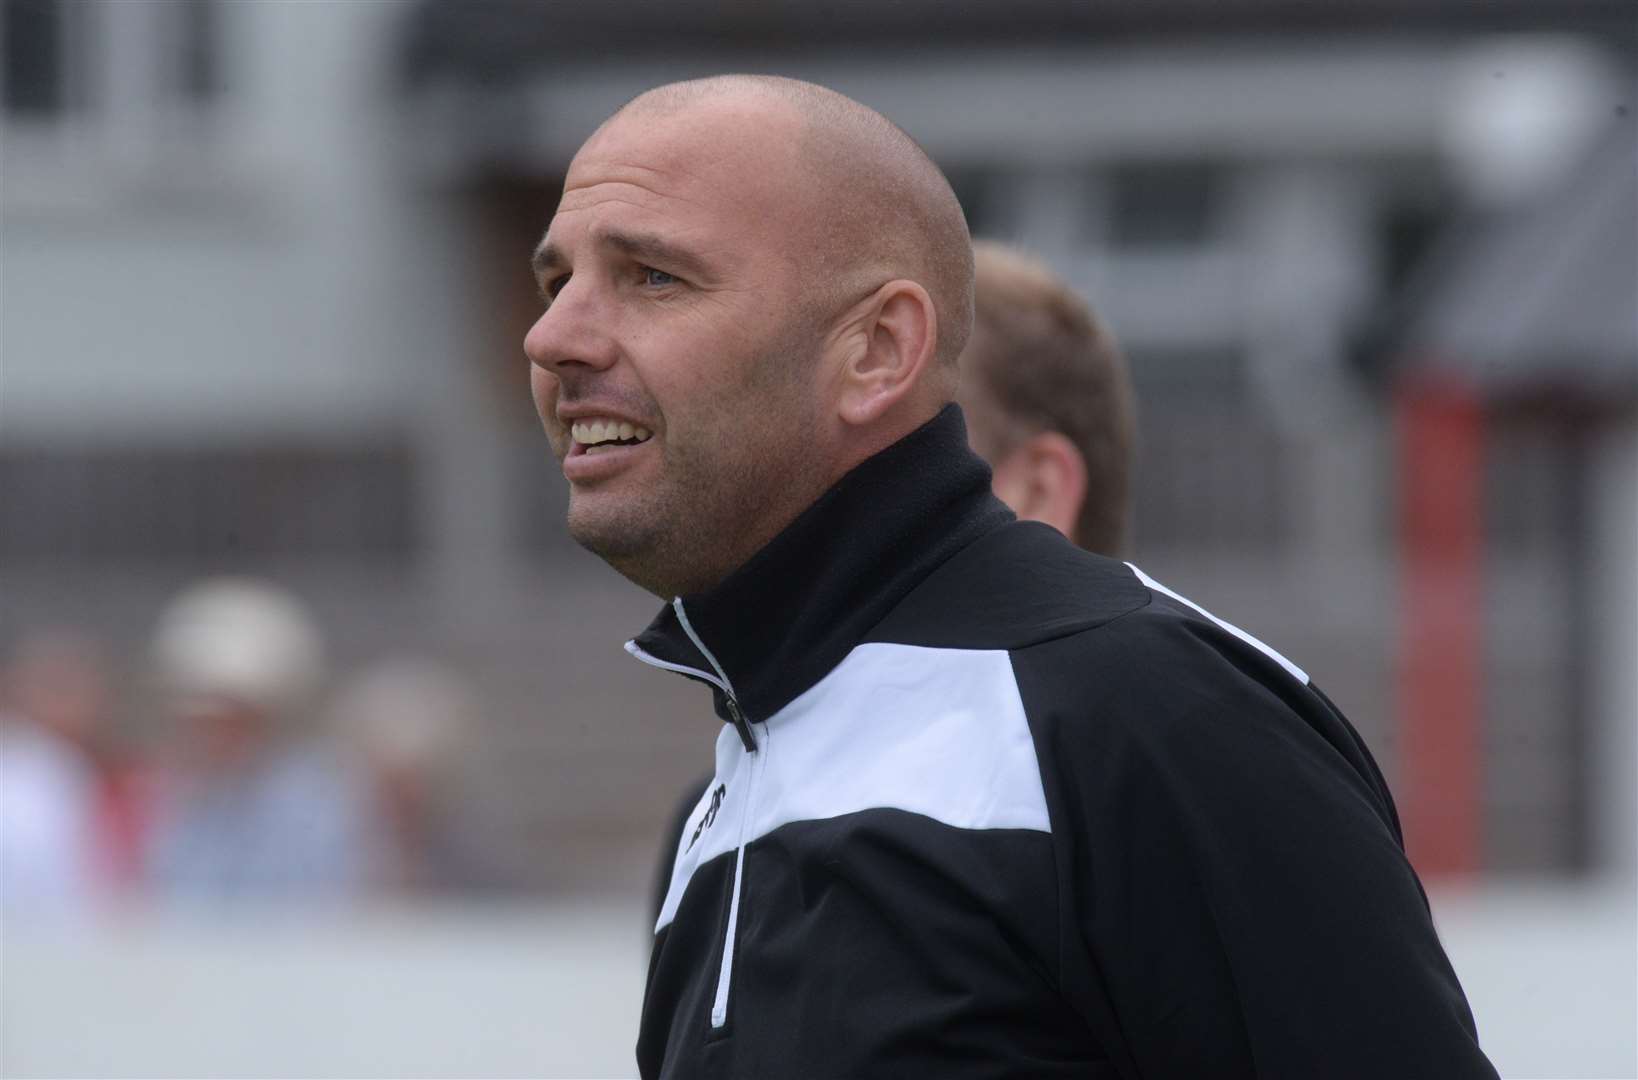 Hollands & Blair manager Scott Porter expects a better league campaign this season